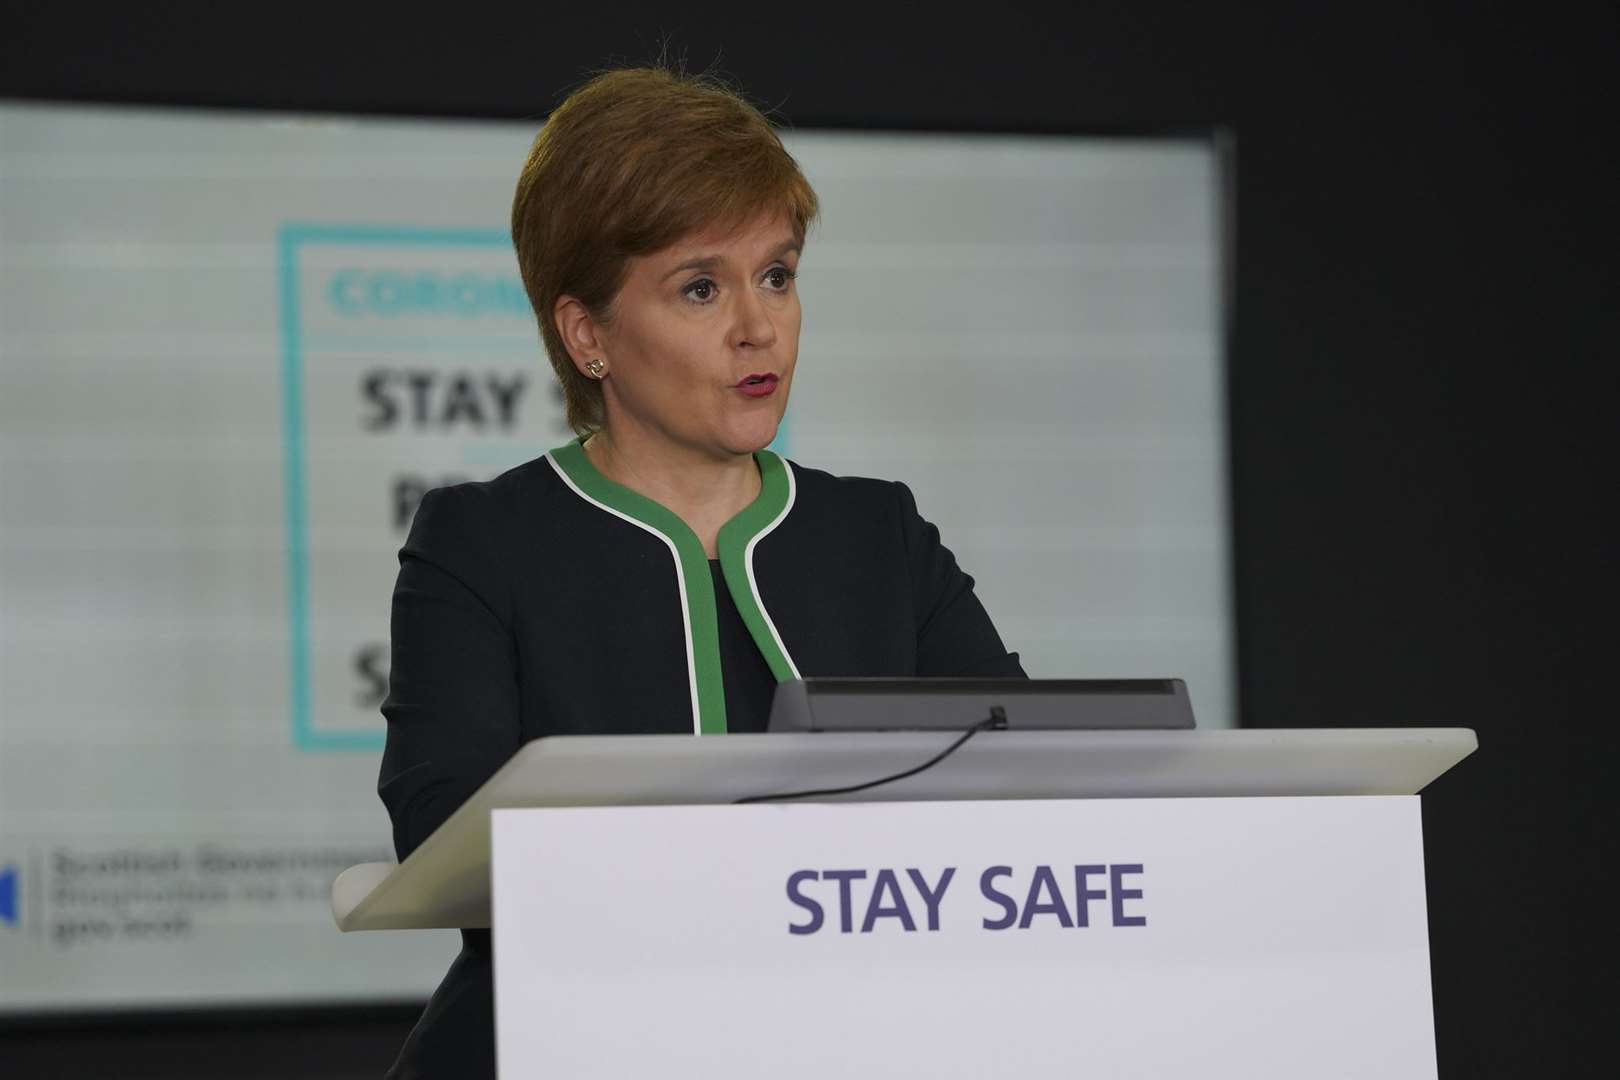 The First Minister has issued a final warning to professional footballers